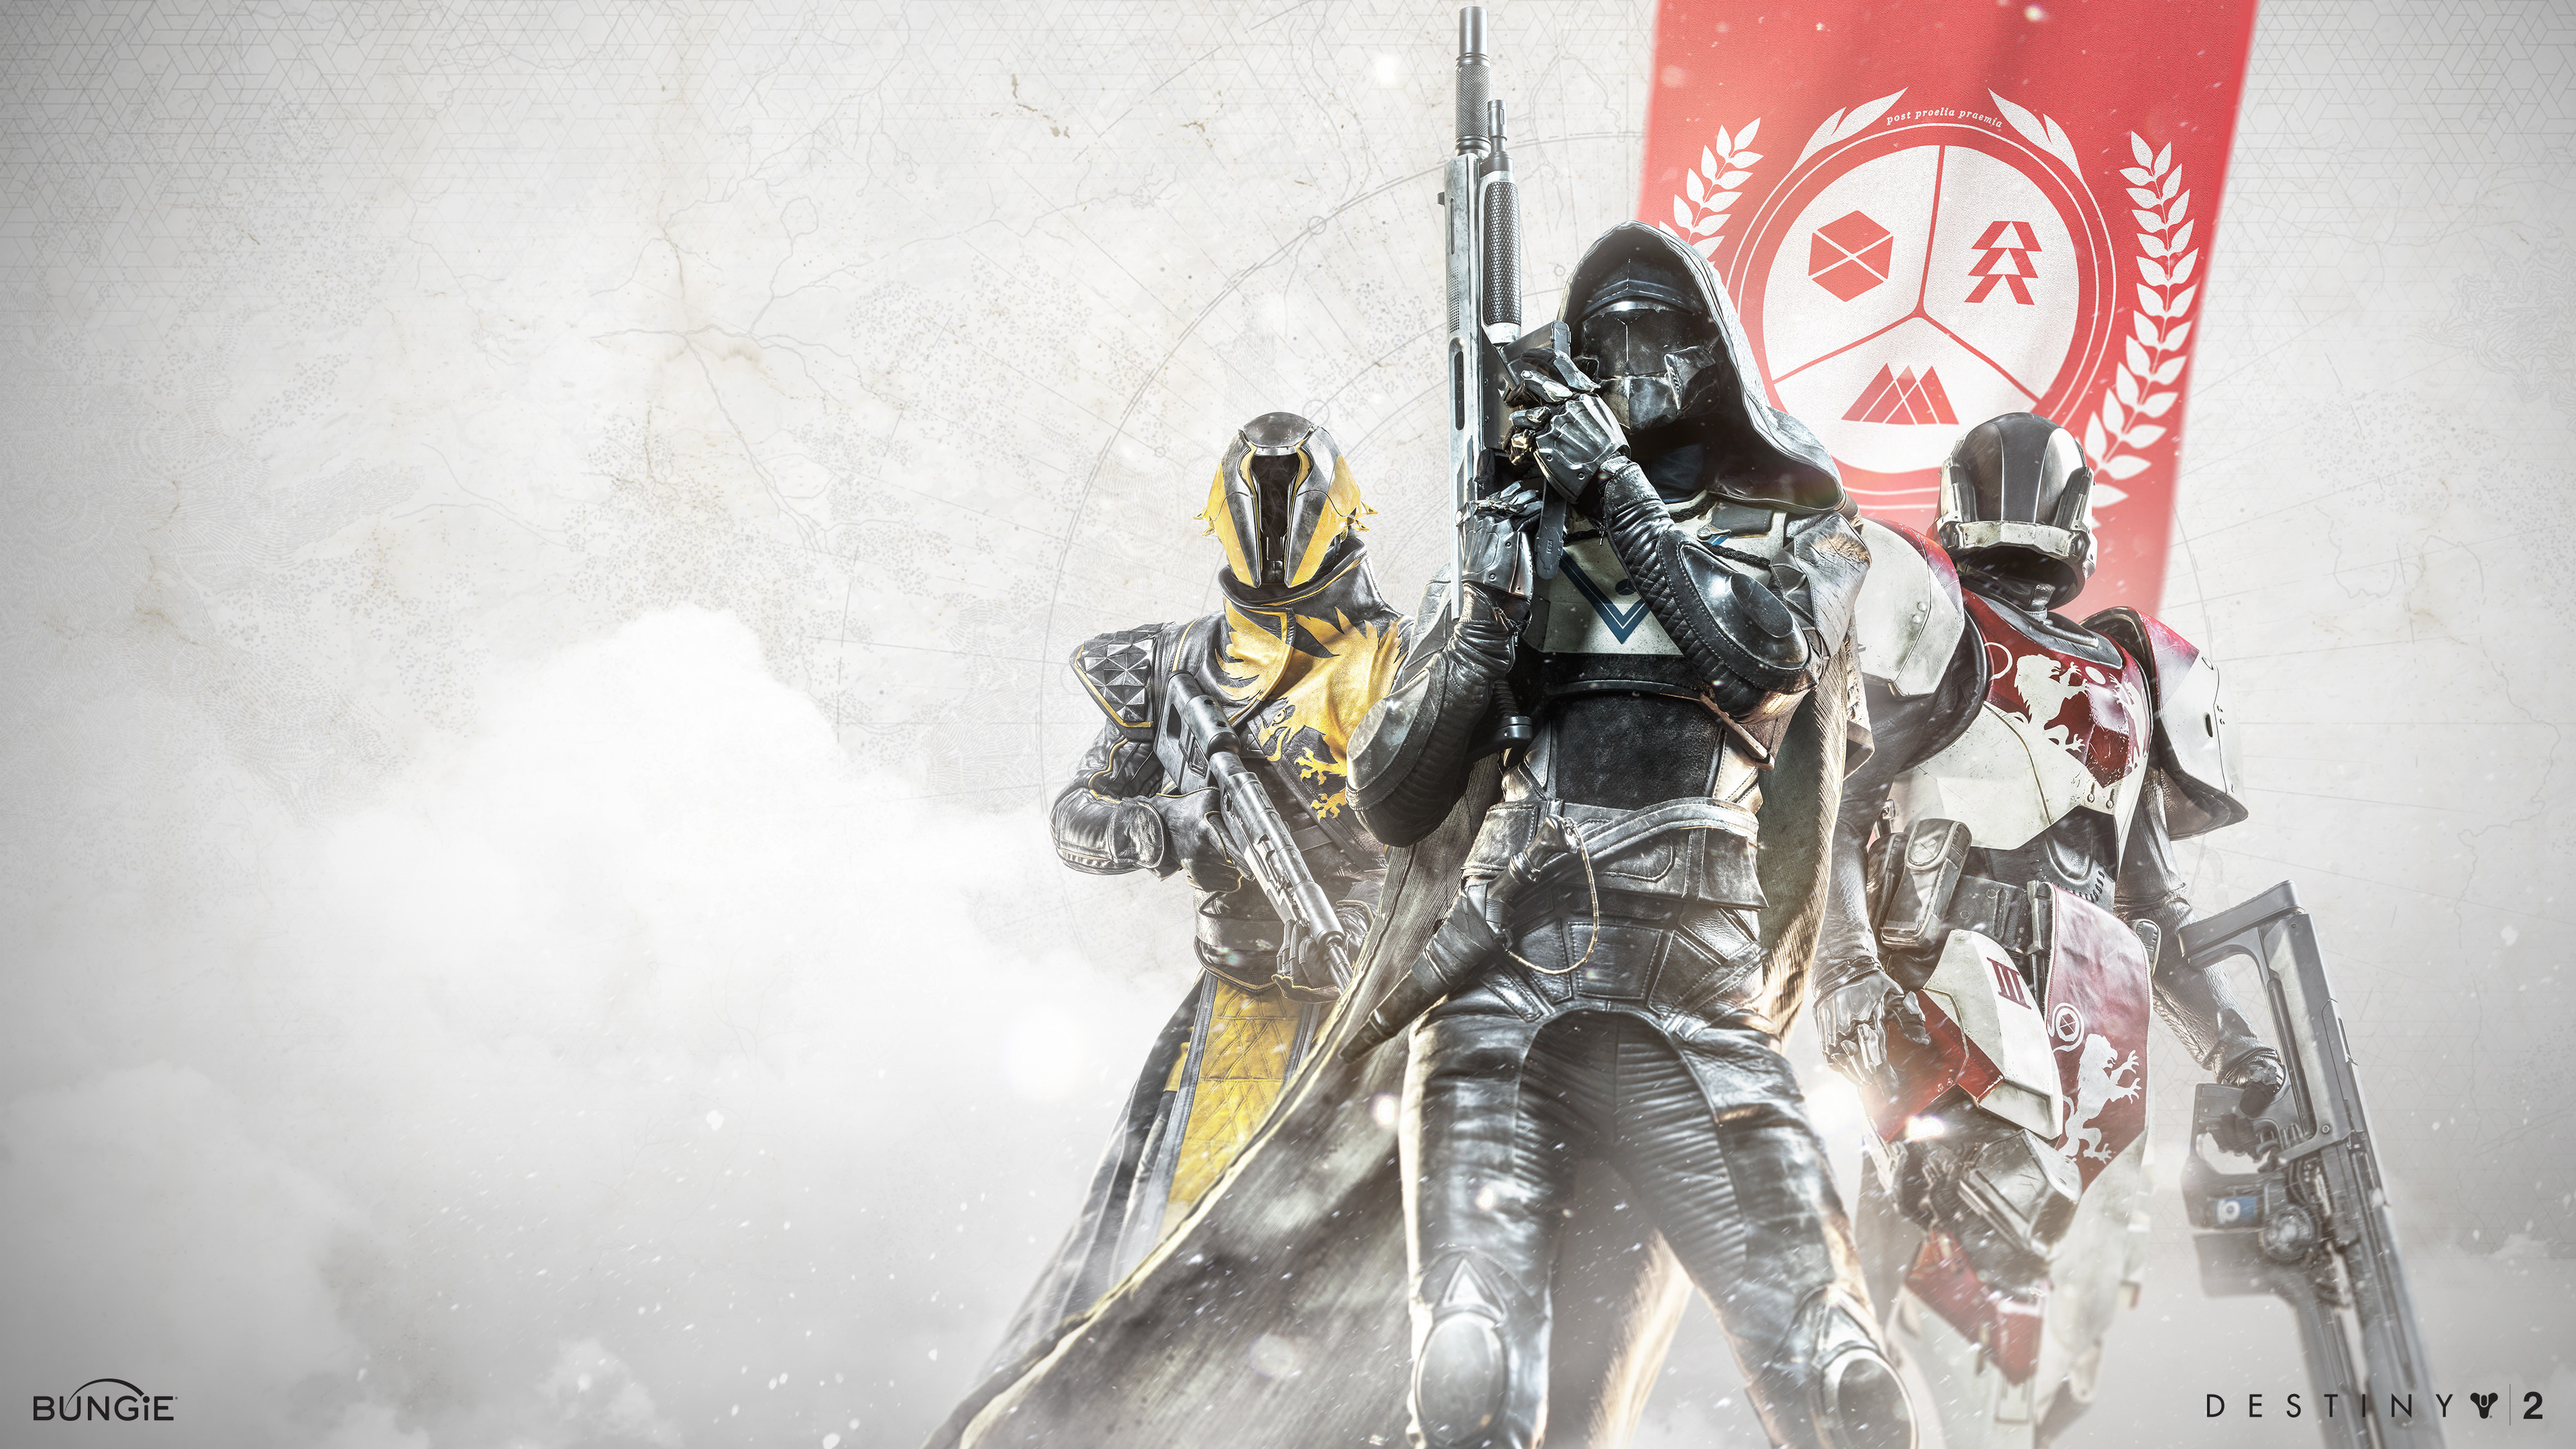 3840x2160 40+ Destiny 2 HD & 4k Wallpapers with Hunters, Titans & More from Bungie!